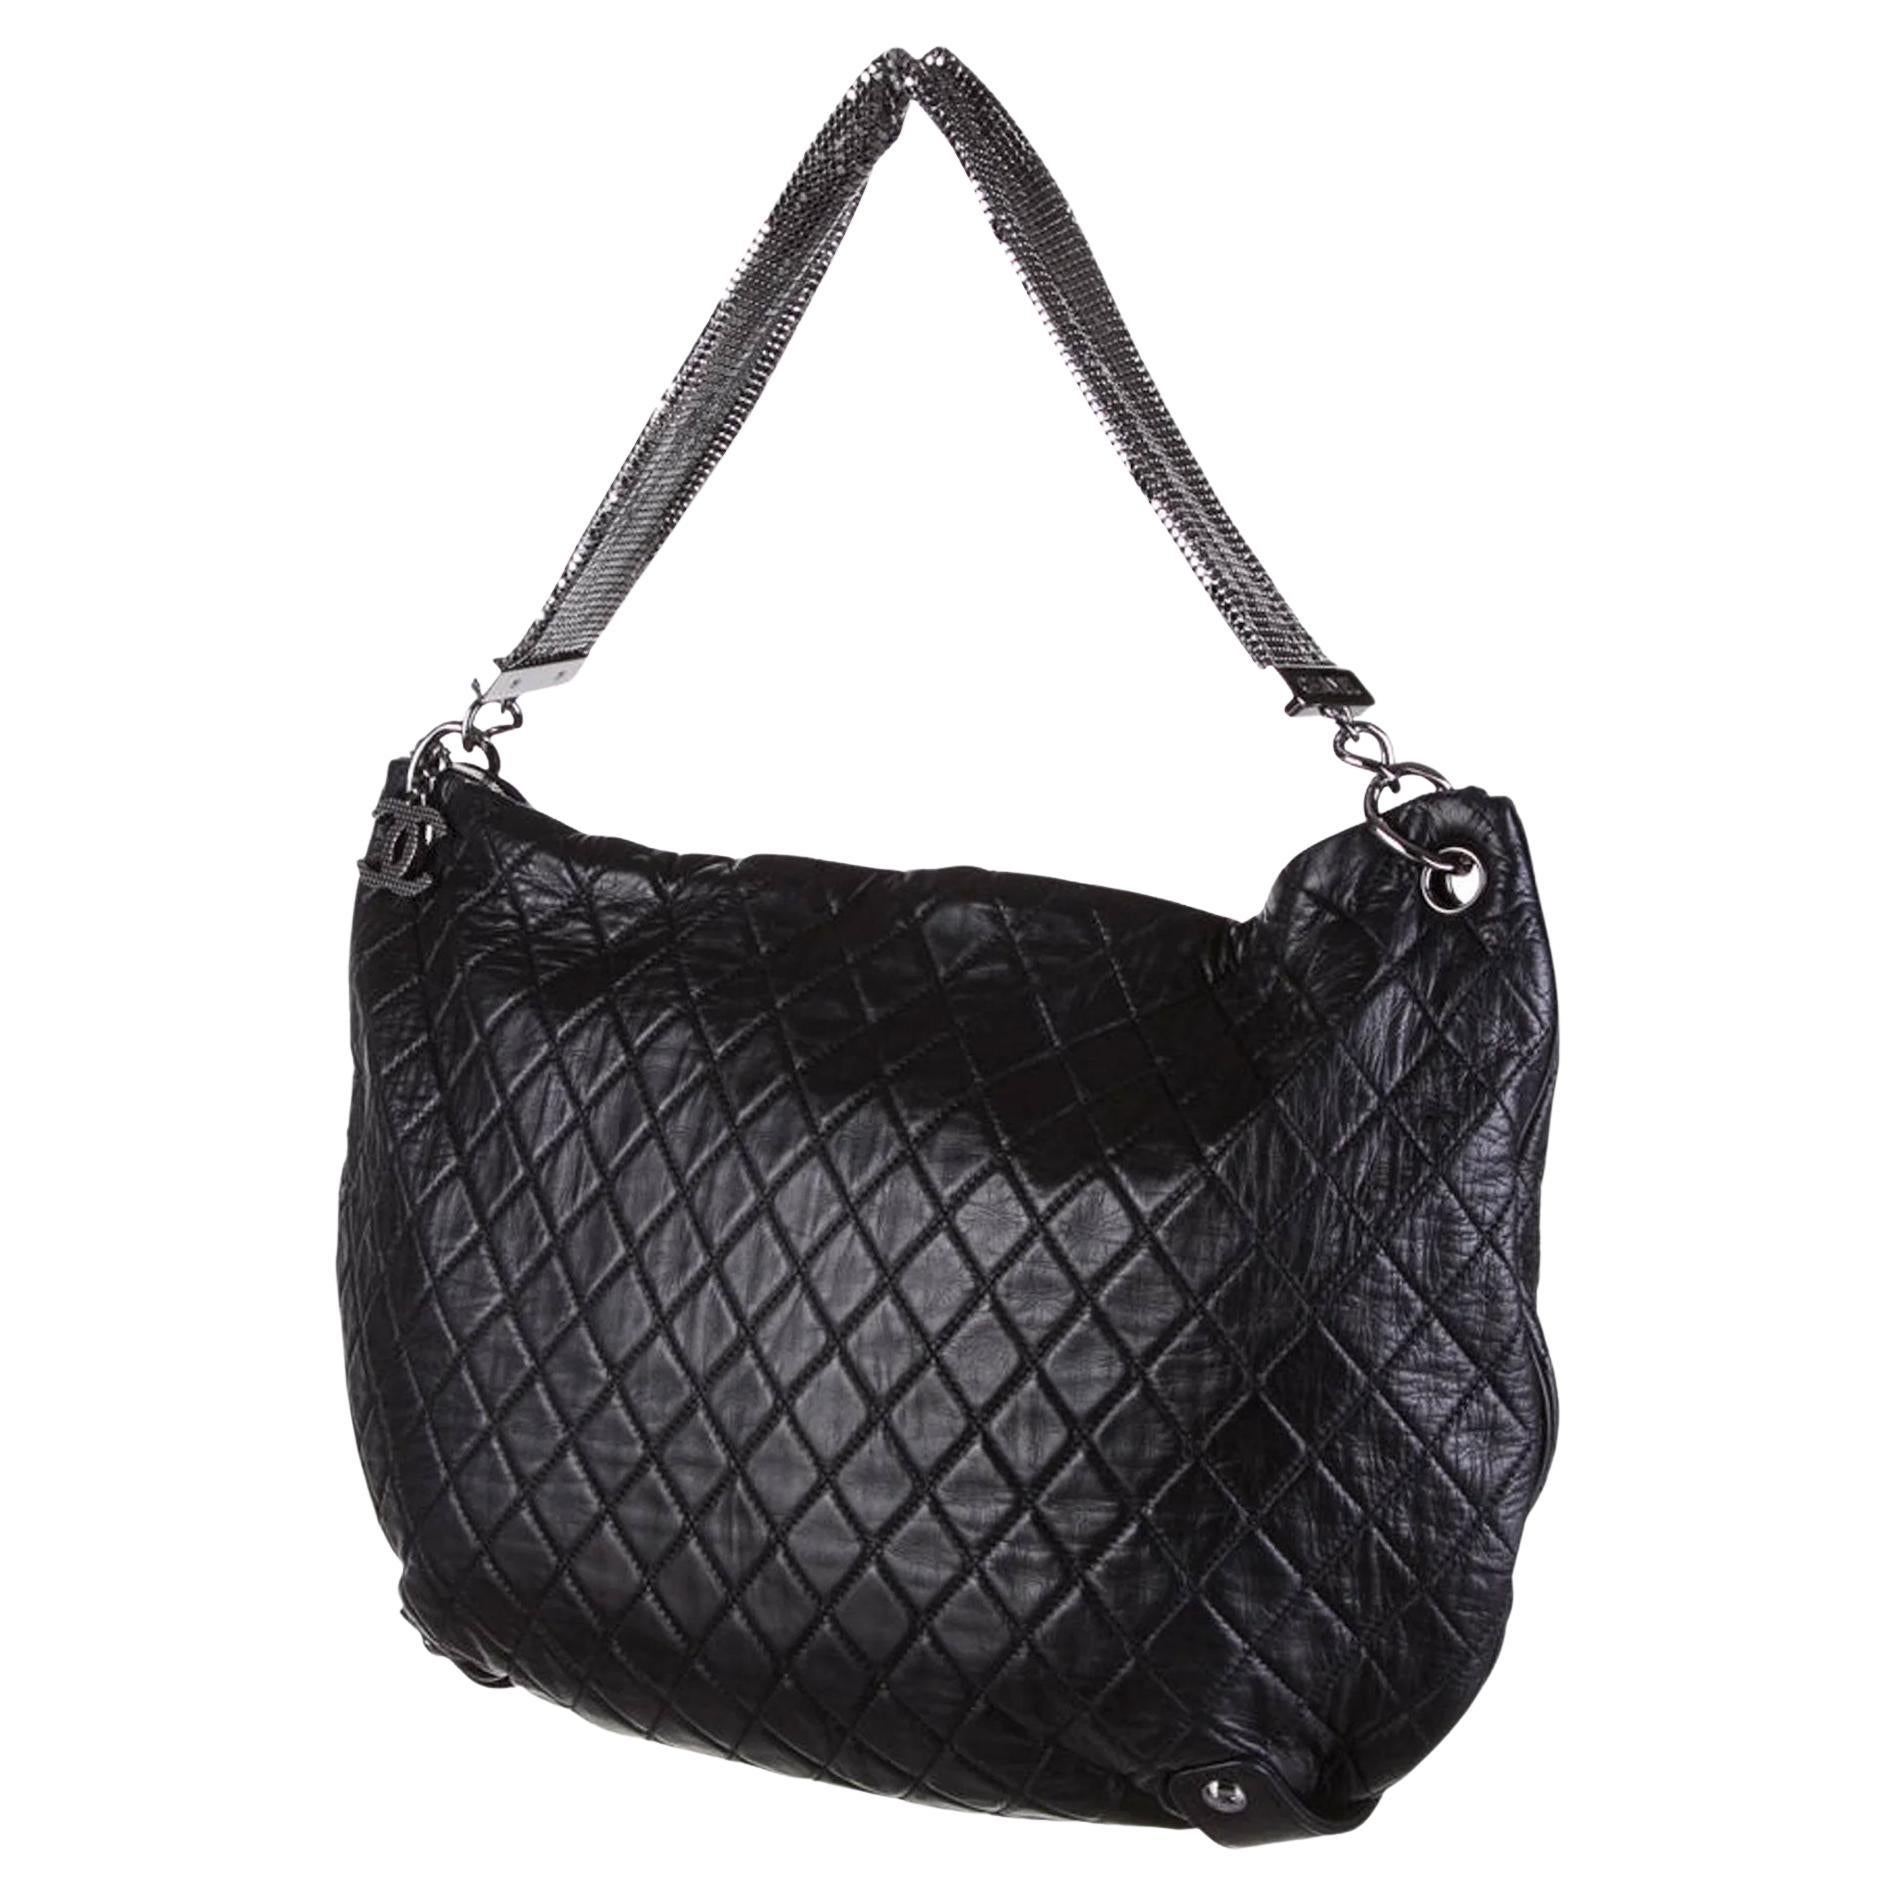 Chanel Rare Jumbo Hobo Limited Edition Mesh Chain Quilted Black Lambskin Leather